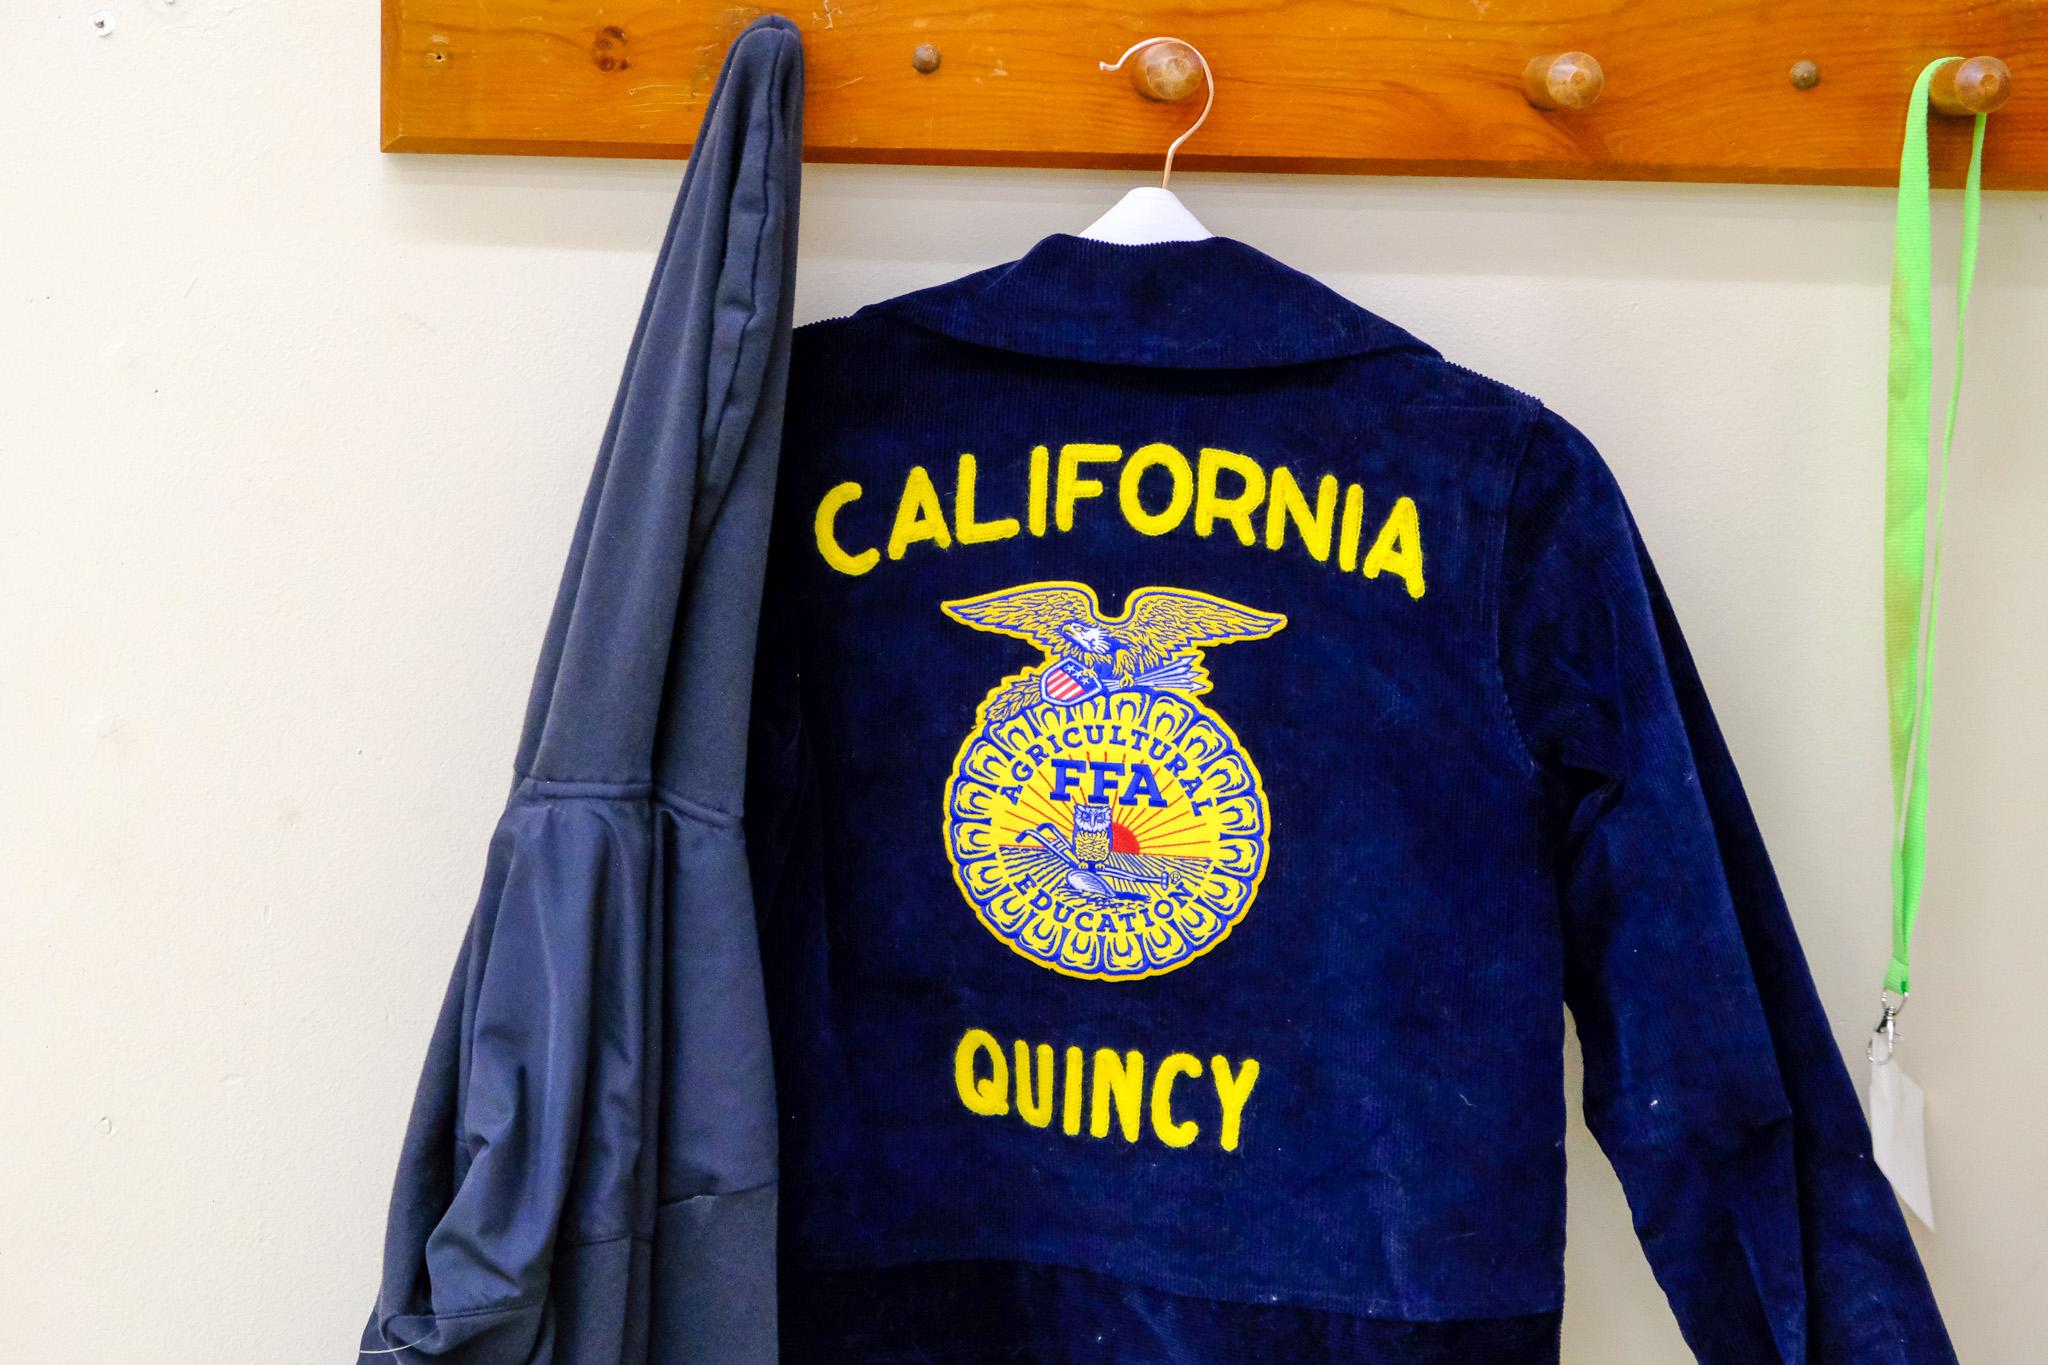 Quincy FFA chapter jacket